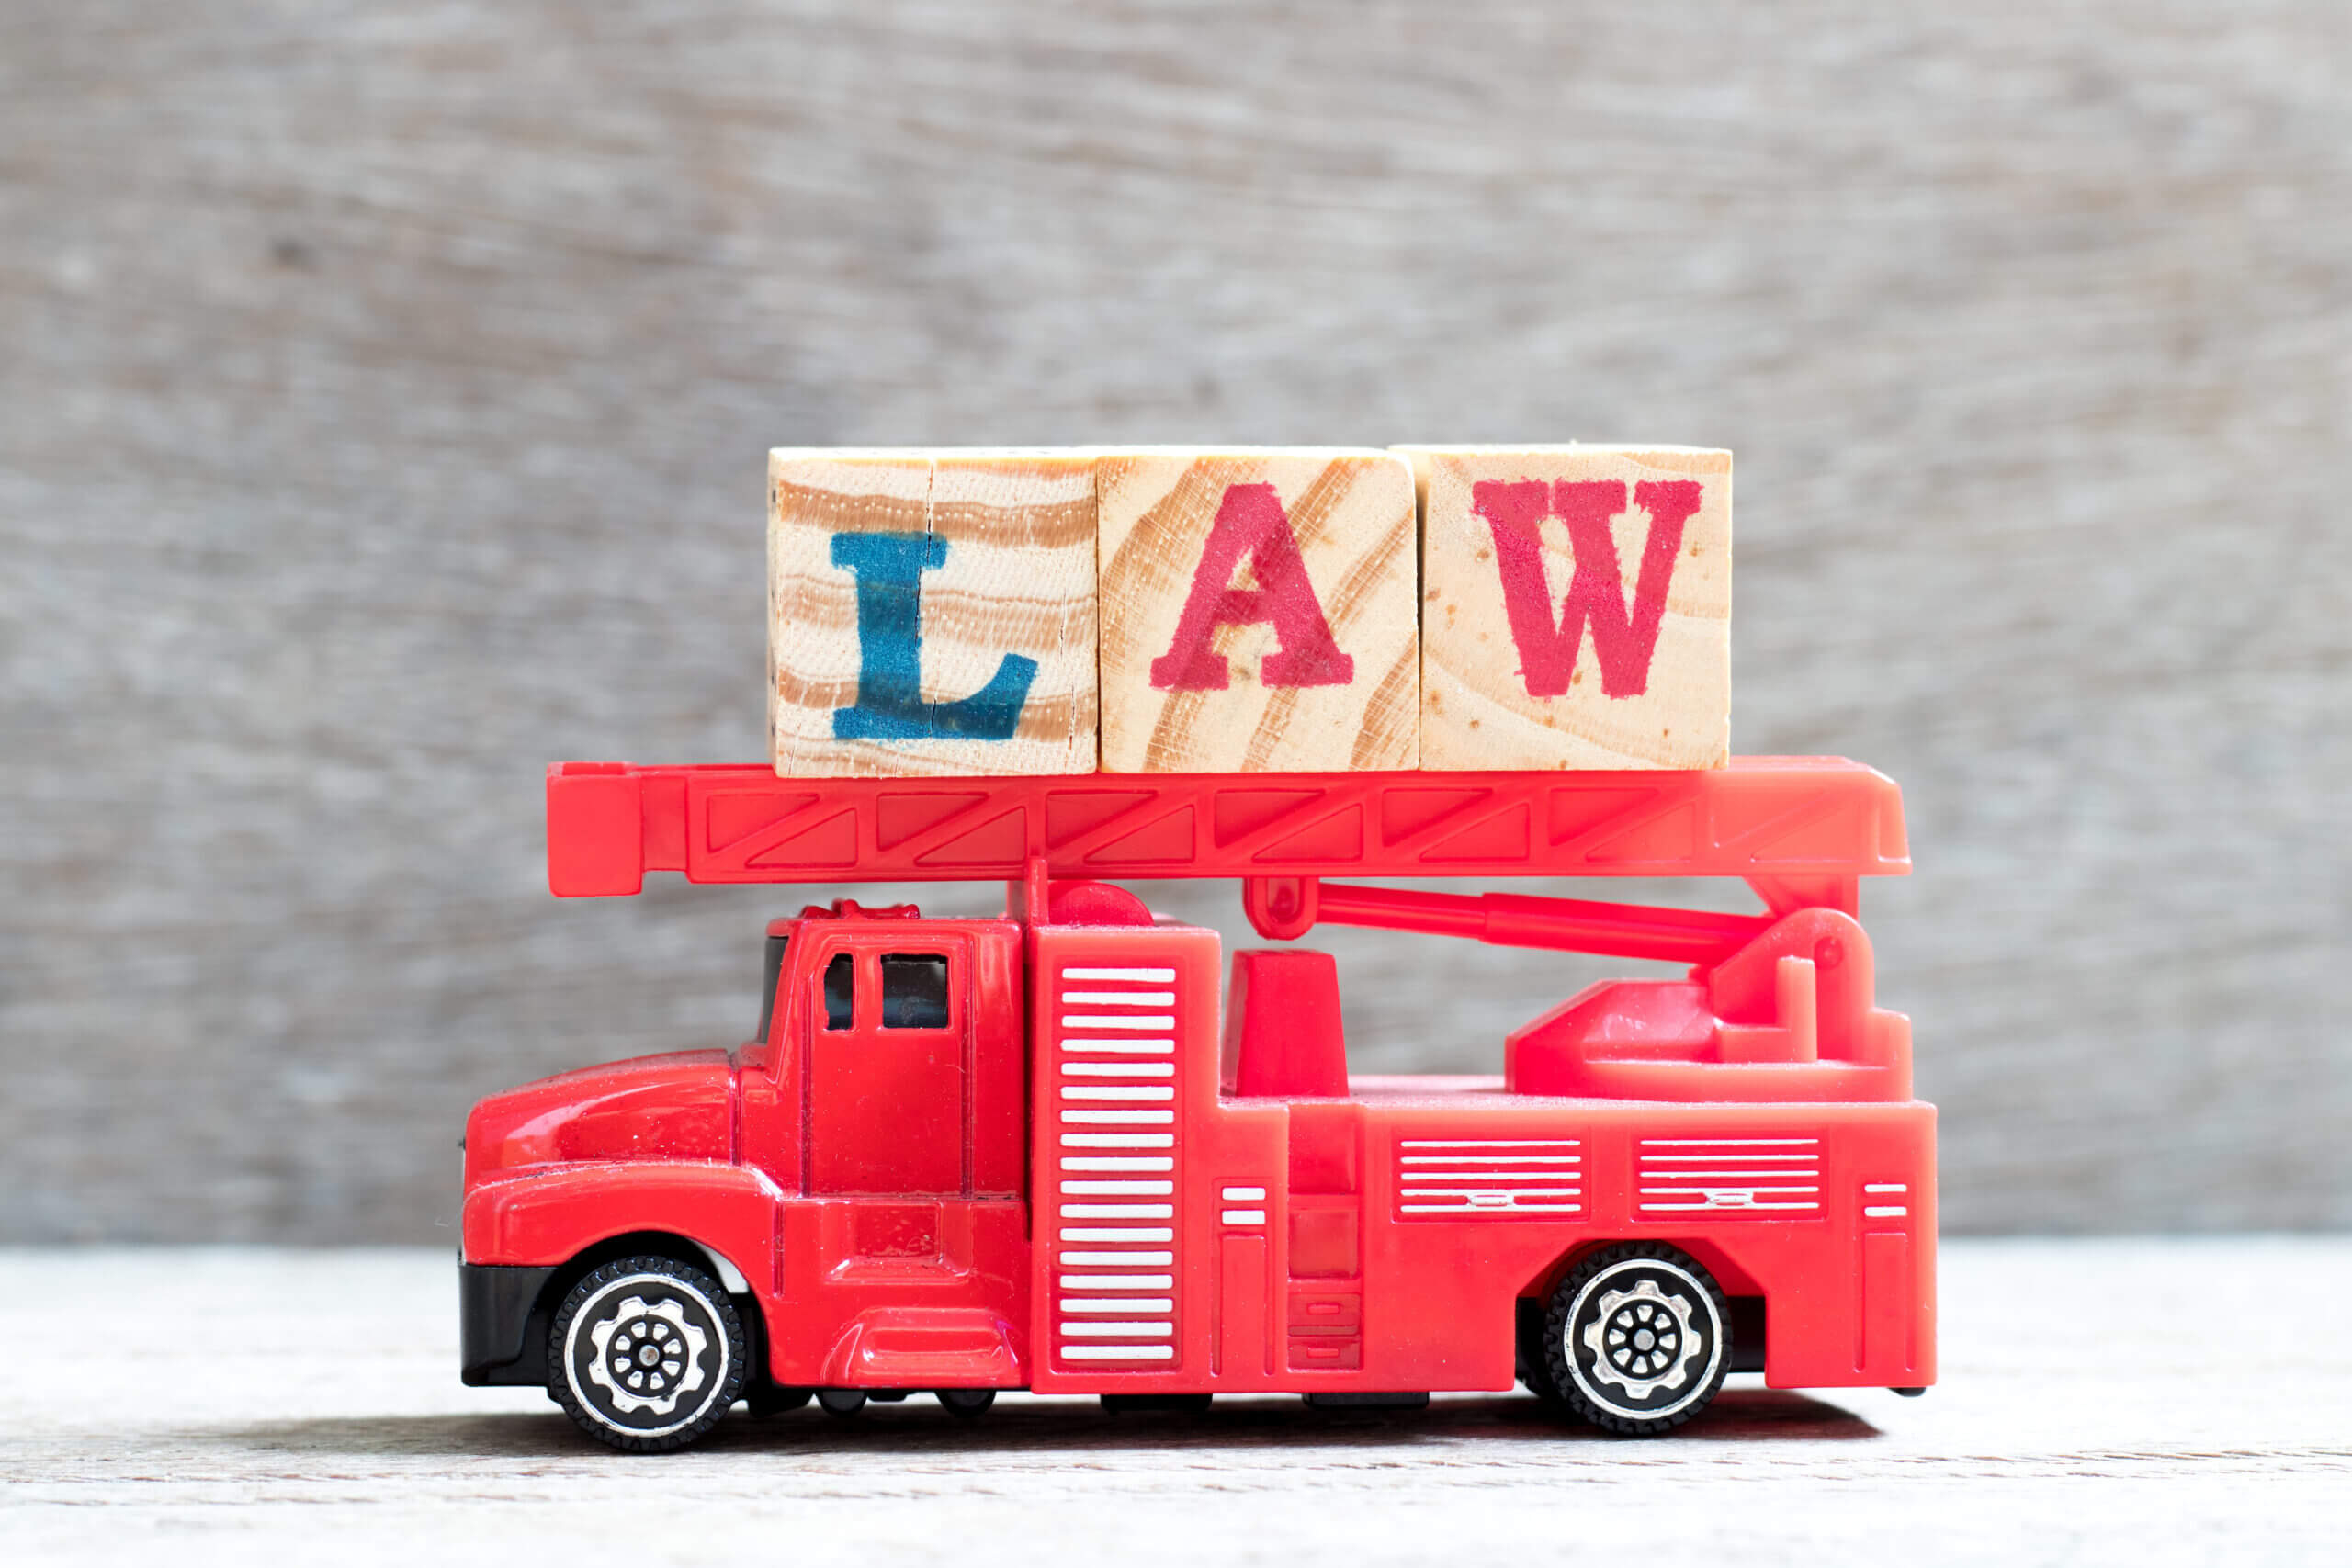 Toy fire ladder truck hold letter block in word law on wood background